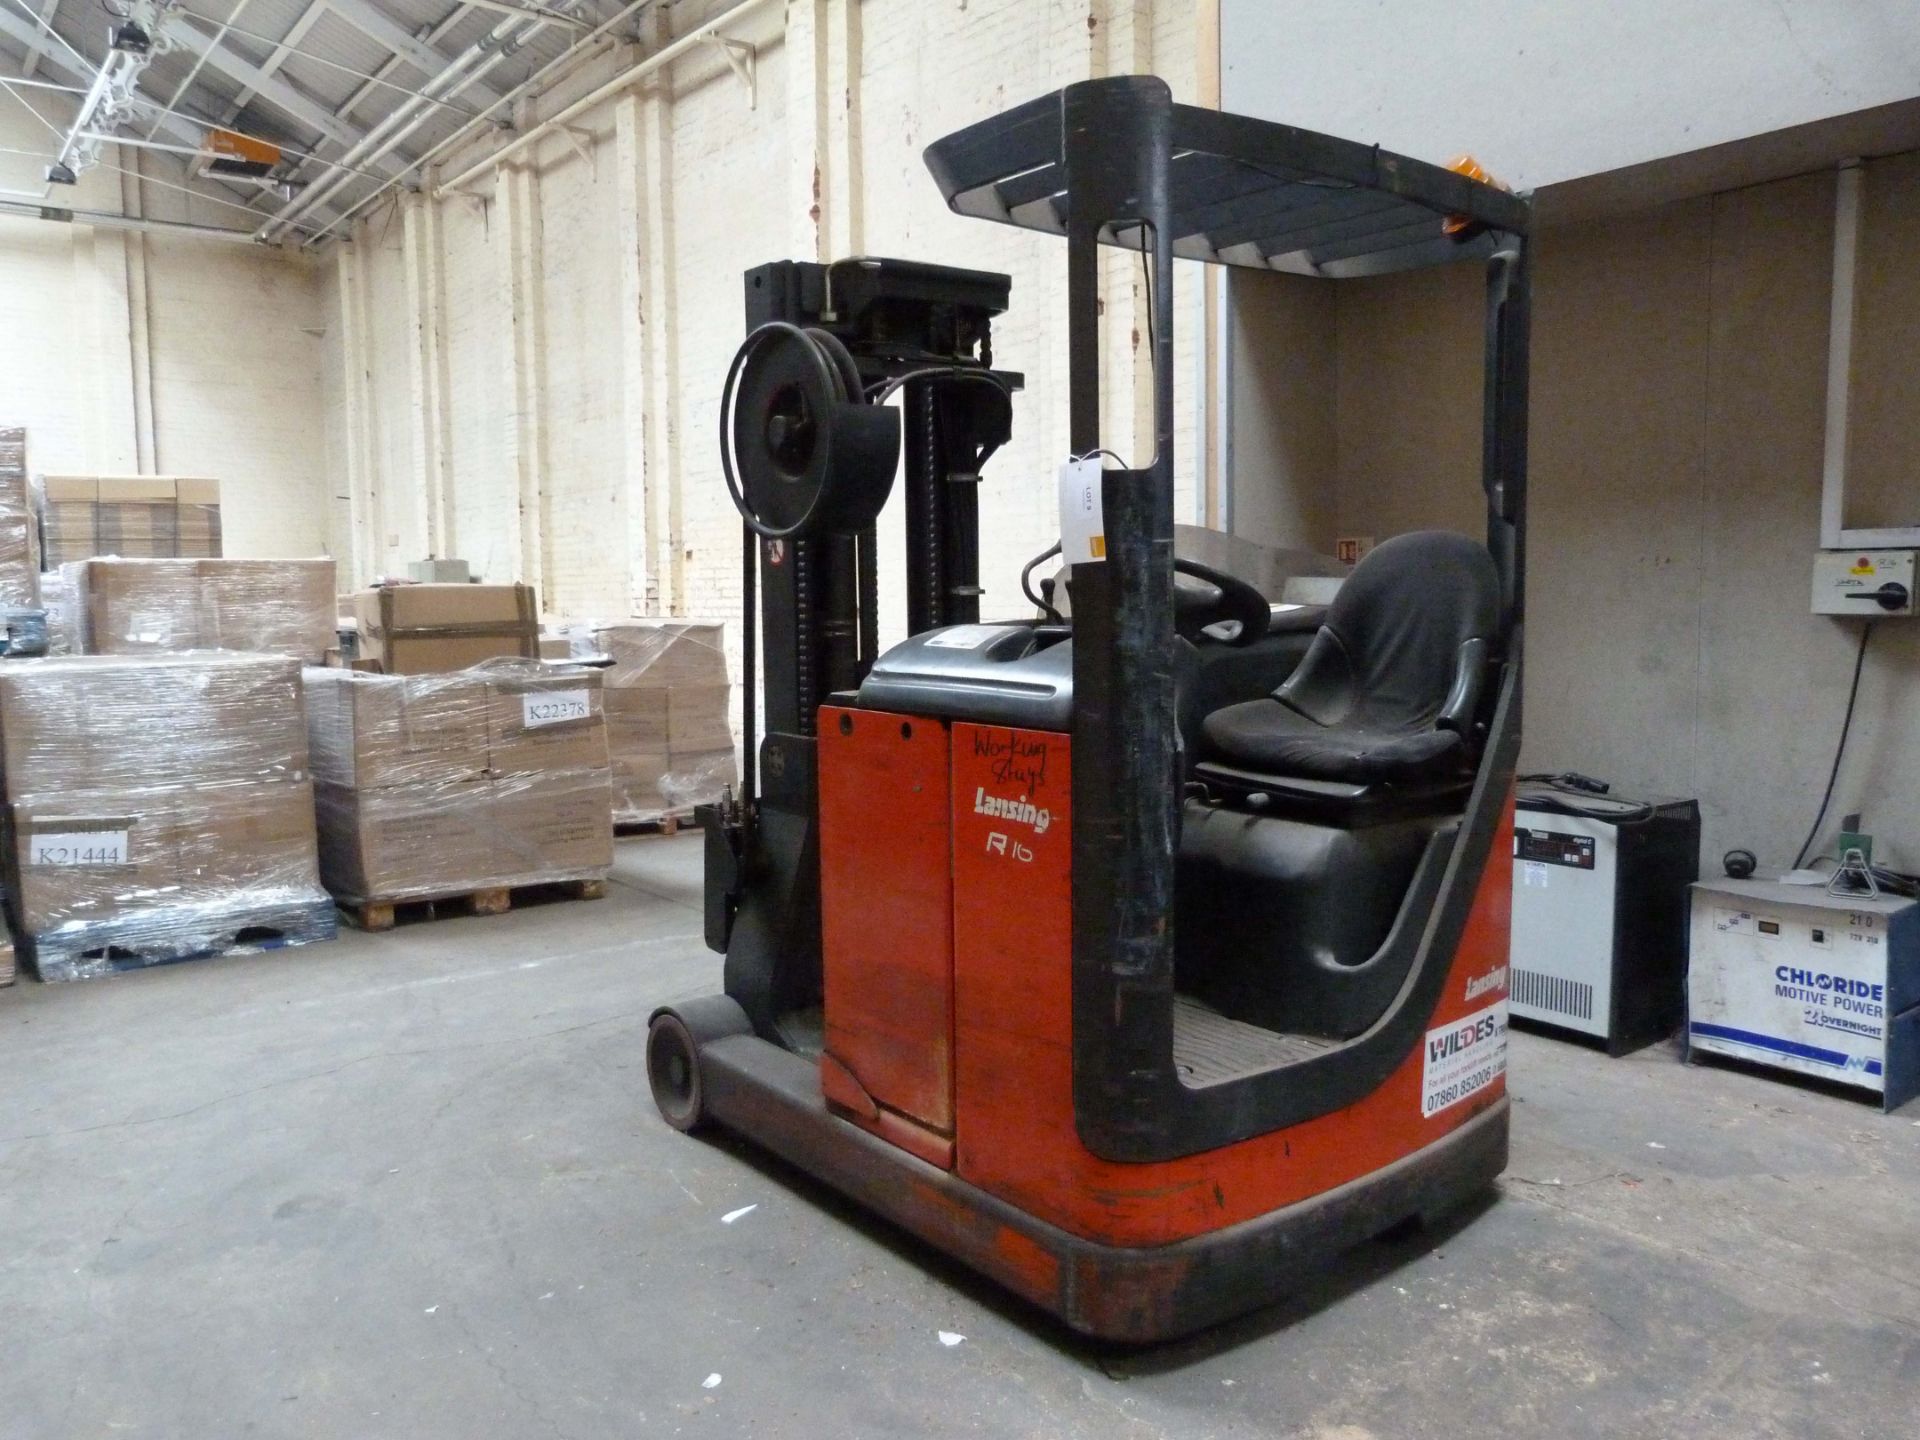 LANSING R16 battery Reach truck with charger NO FORKS 1996 Wolverhampton - Image 2 of 2